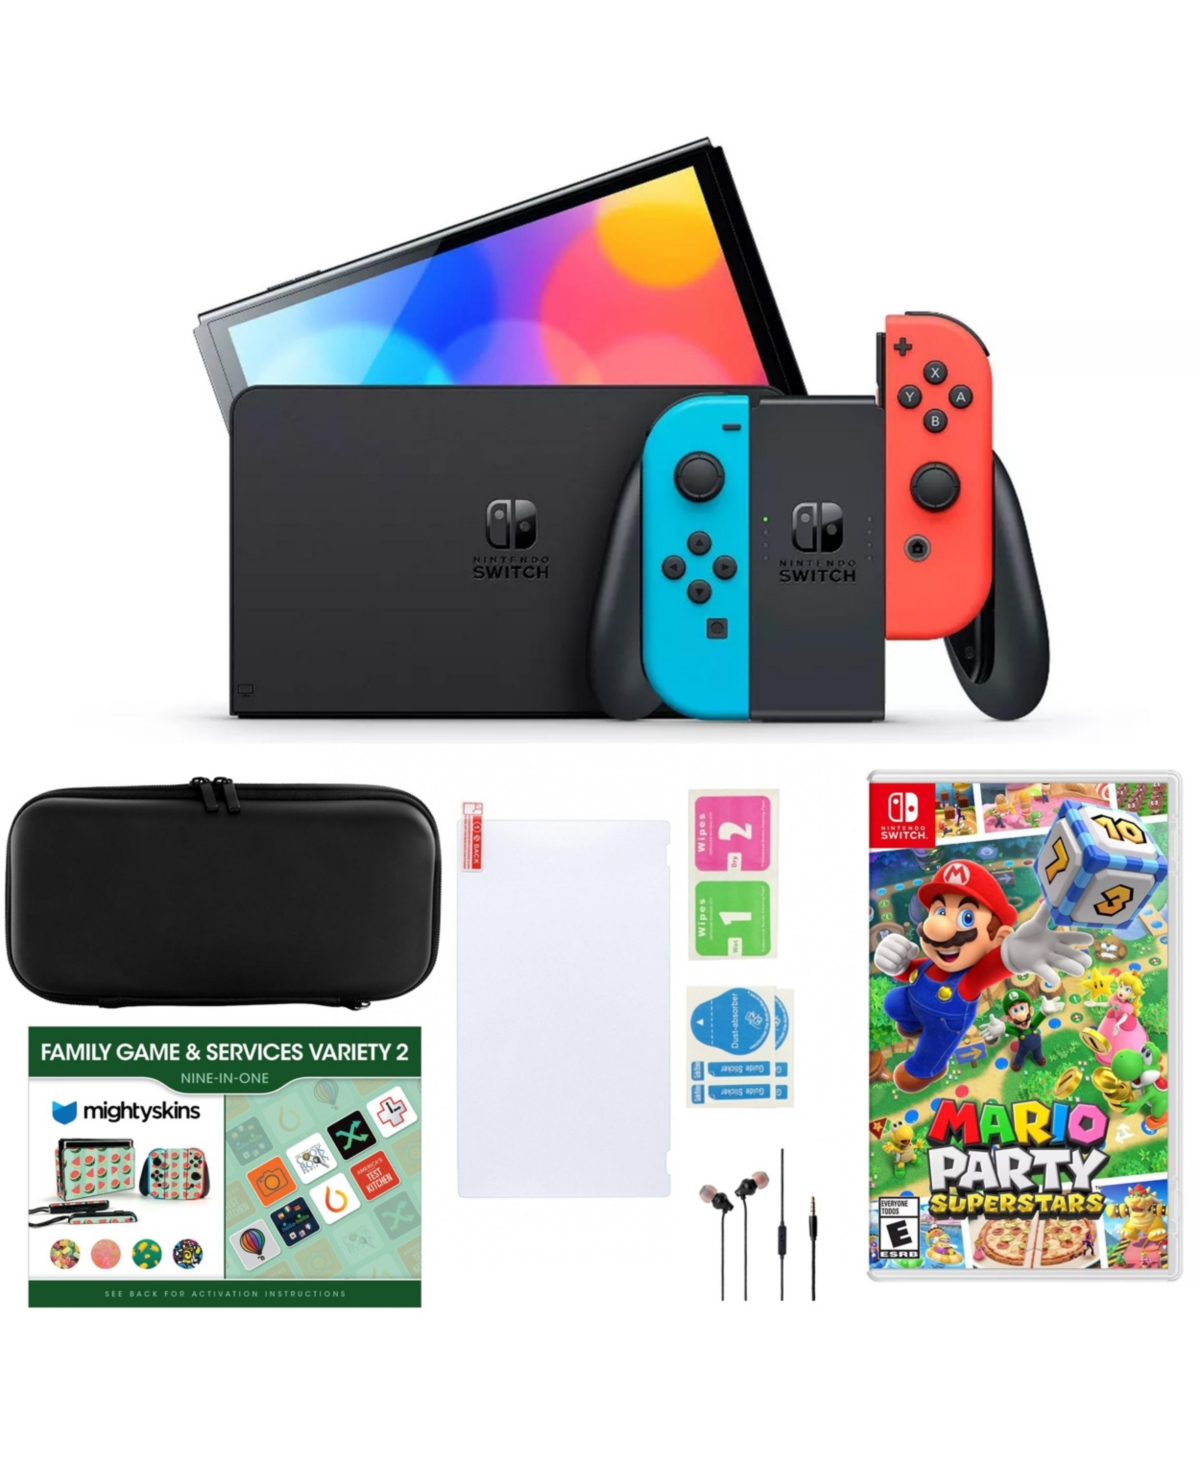 Nintendo Switch Oled In Neon With Mario Party, Accessories & Voucher In Open Miscellaneous